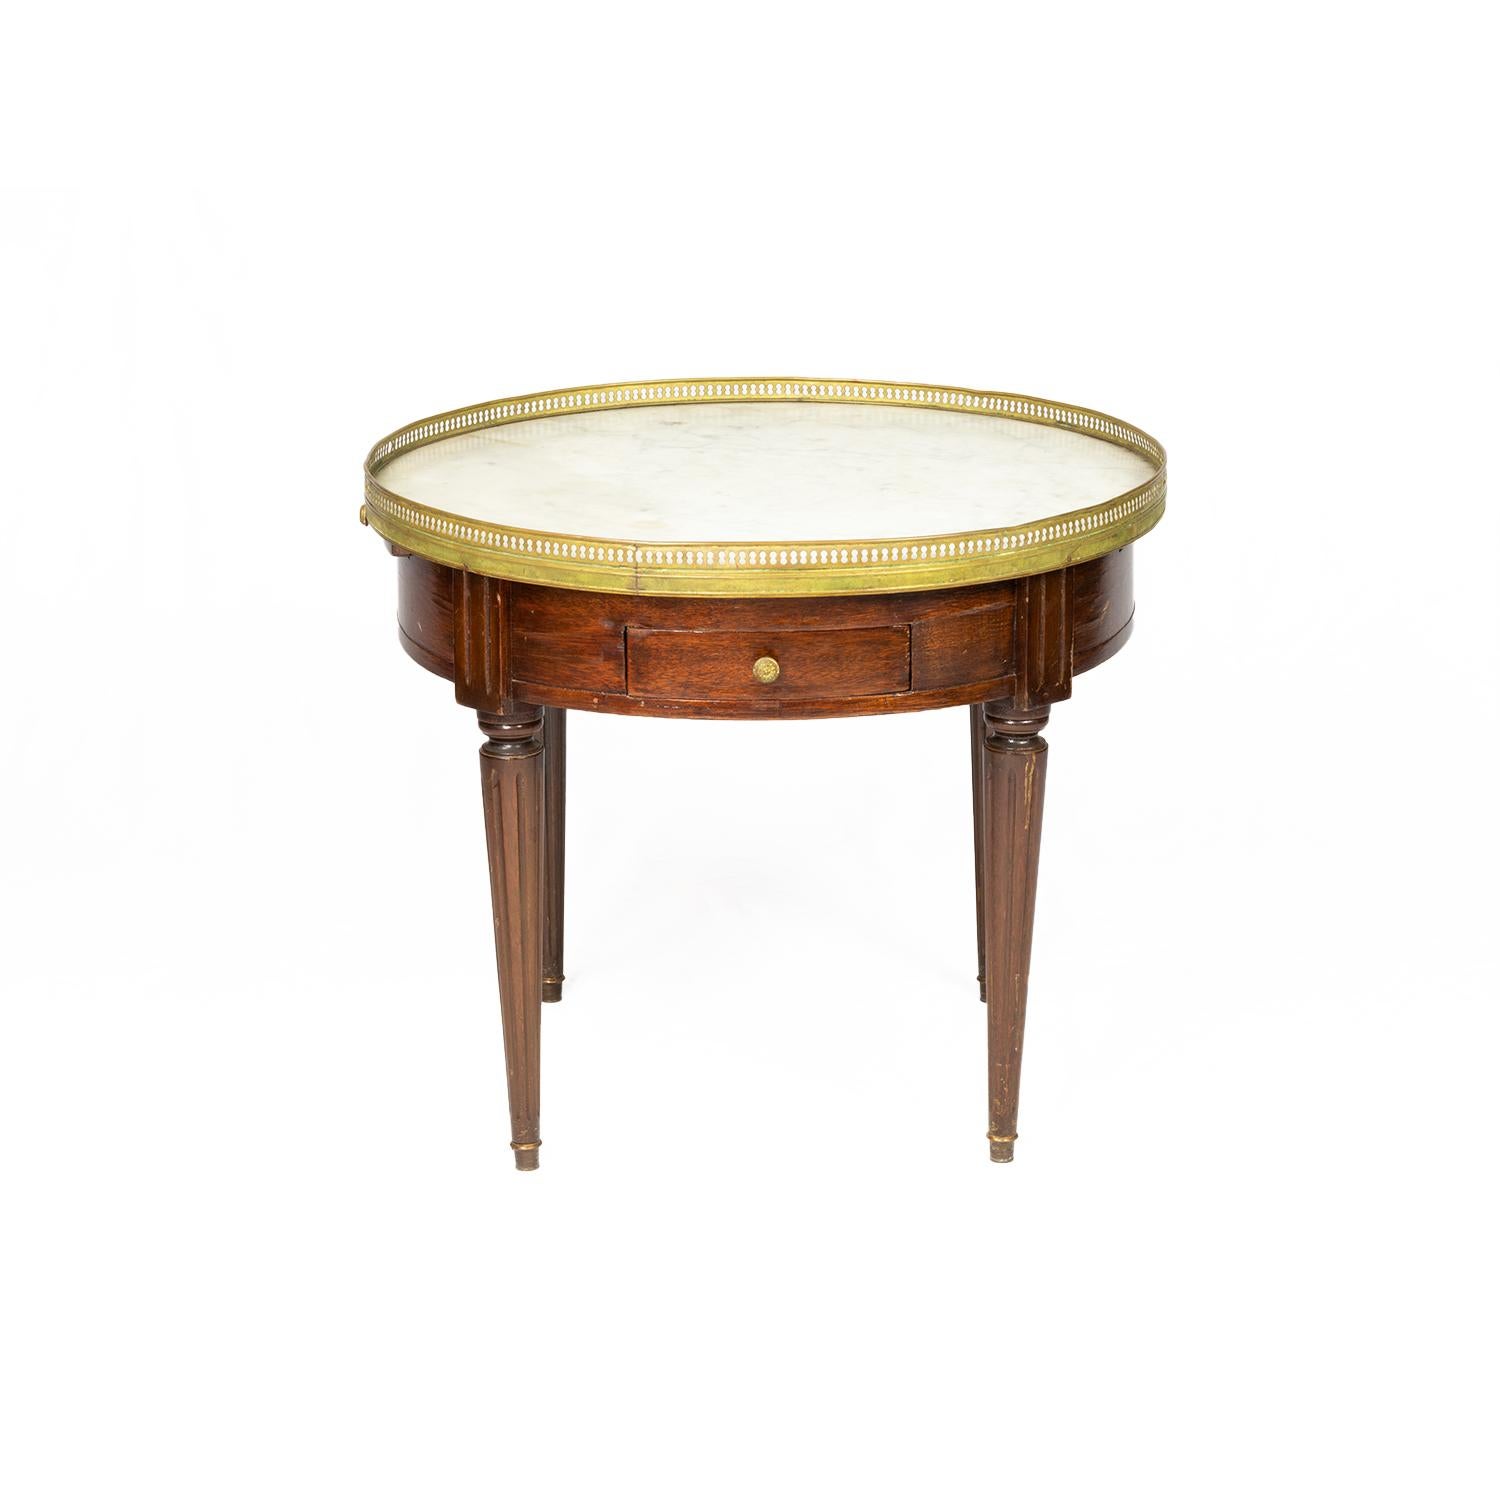 A unique 19th century Louis XVI Style mahogany round side table Bouillotte.
Marble top, golden rail, two drawers and extensions on each side for glasses with leather lining.